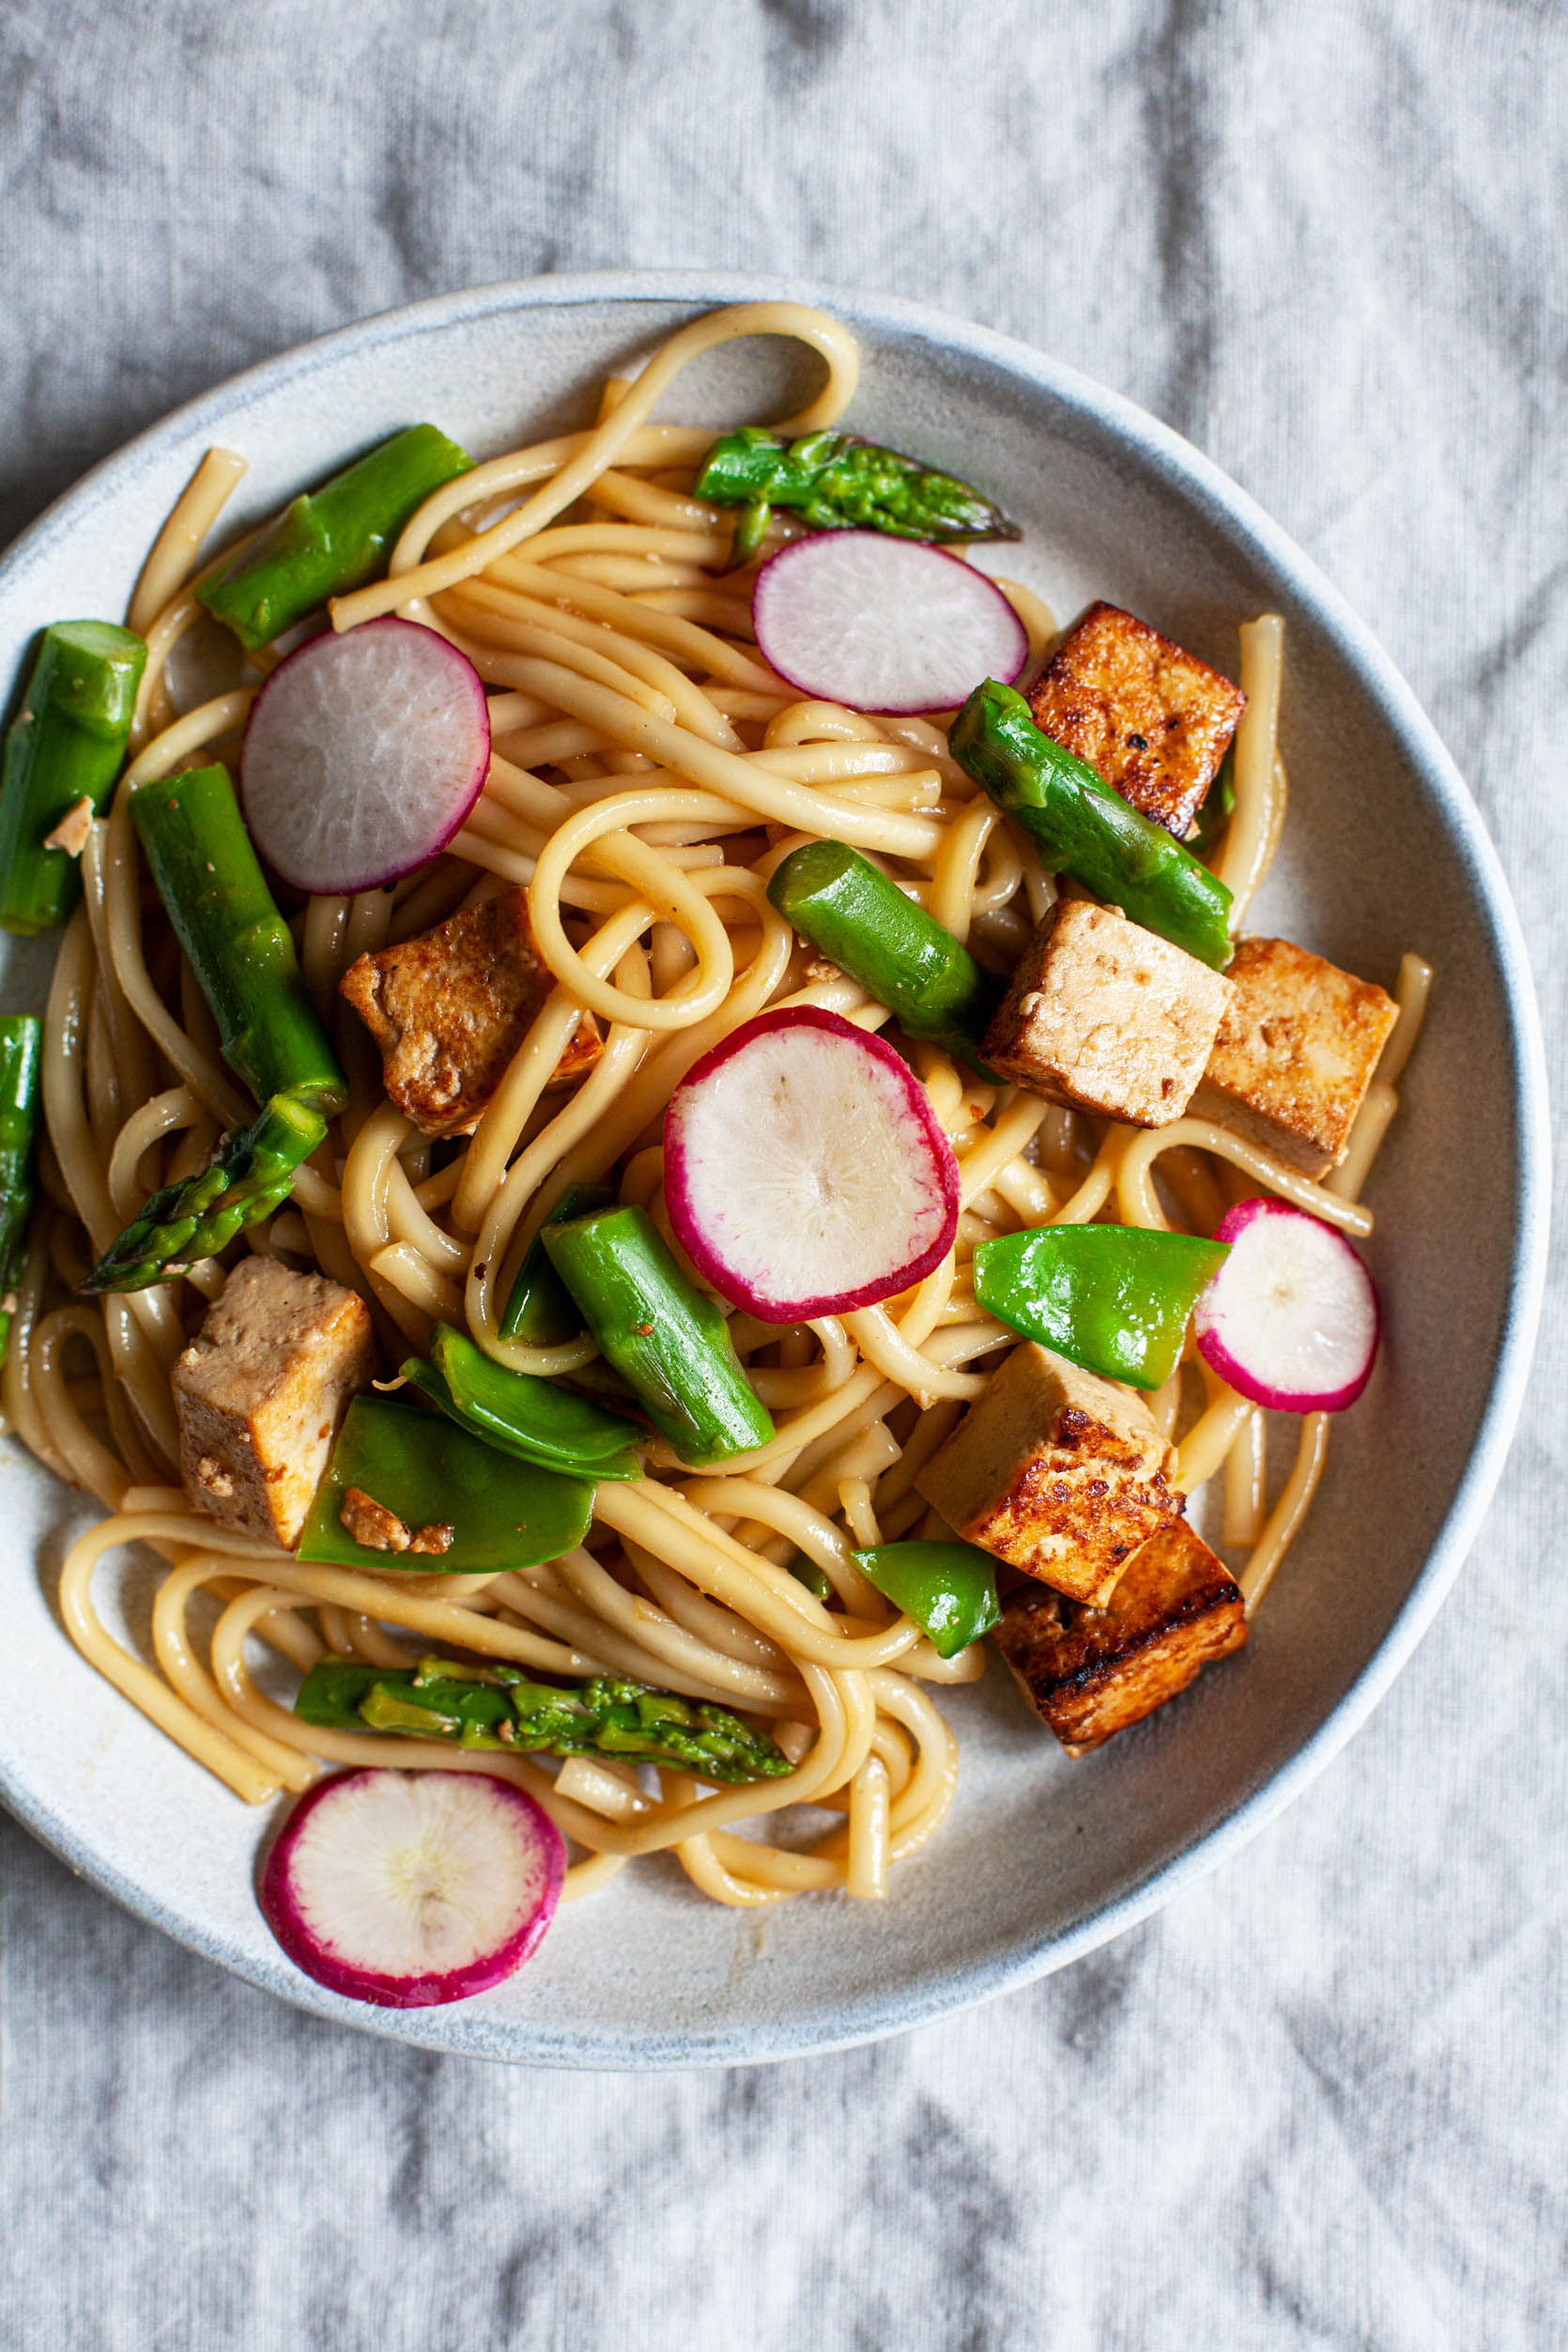 Tofu and Udon Noodle Salad with Spring Vegetables | The Full Helping